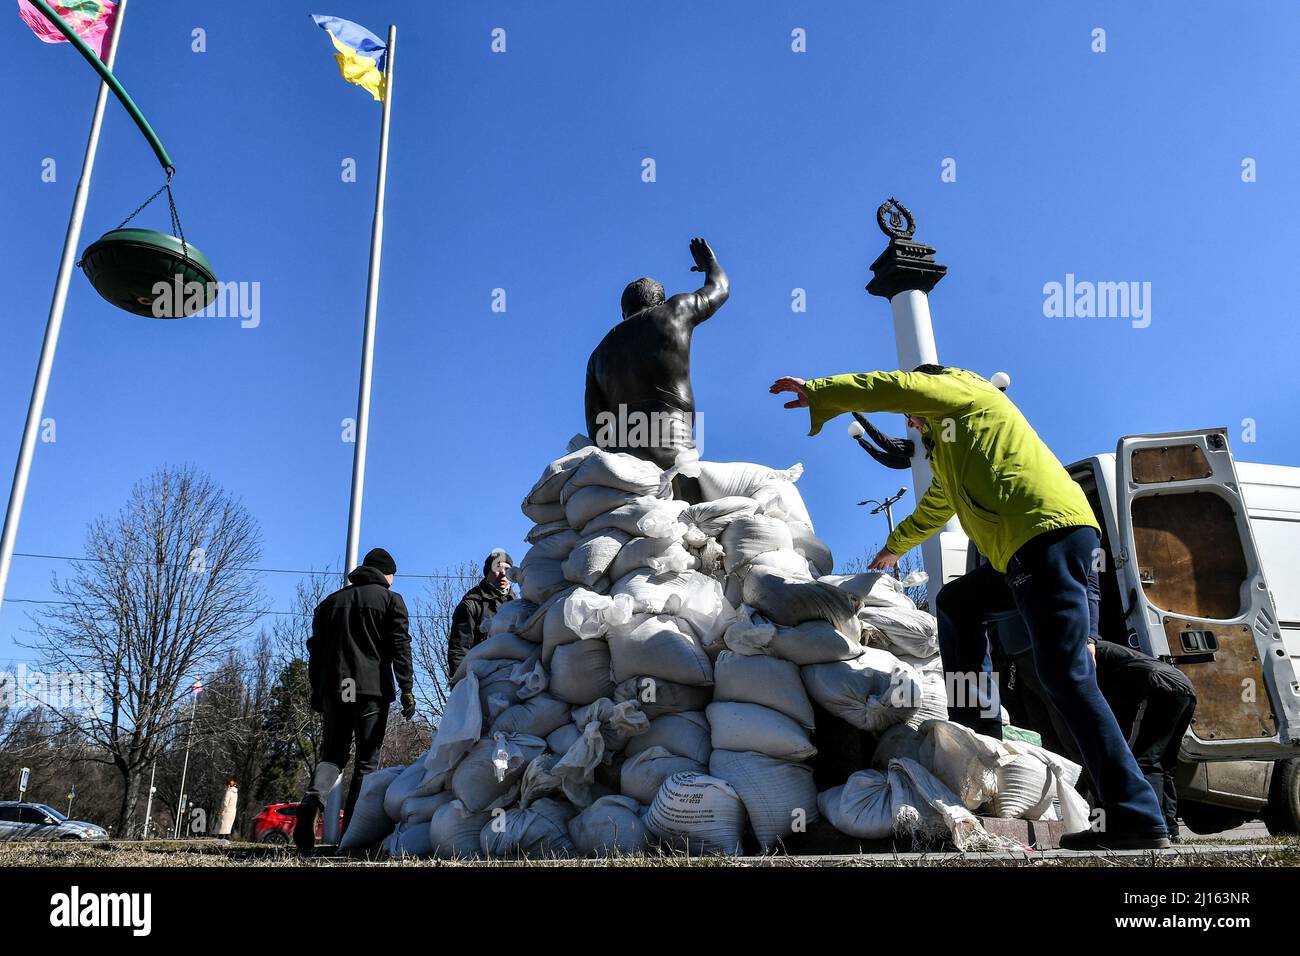 Local volunteers, historians and museum employees put sandbags around the monument to Ukrainian weightlifter, Olympic gold medallist Leonid Zhabotynskyi in a bid to protect the statue from damage in case of Russian attacks, Zaporizhzhia, southeastern Ukraine, March 22, 2022. Photo by Dmytro Smoliyenko/Ukrinform/ABACAPRESS.COM Stock Photo